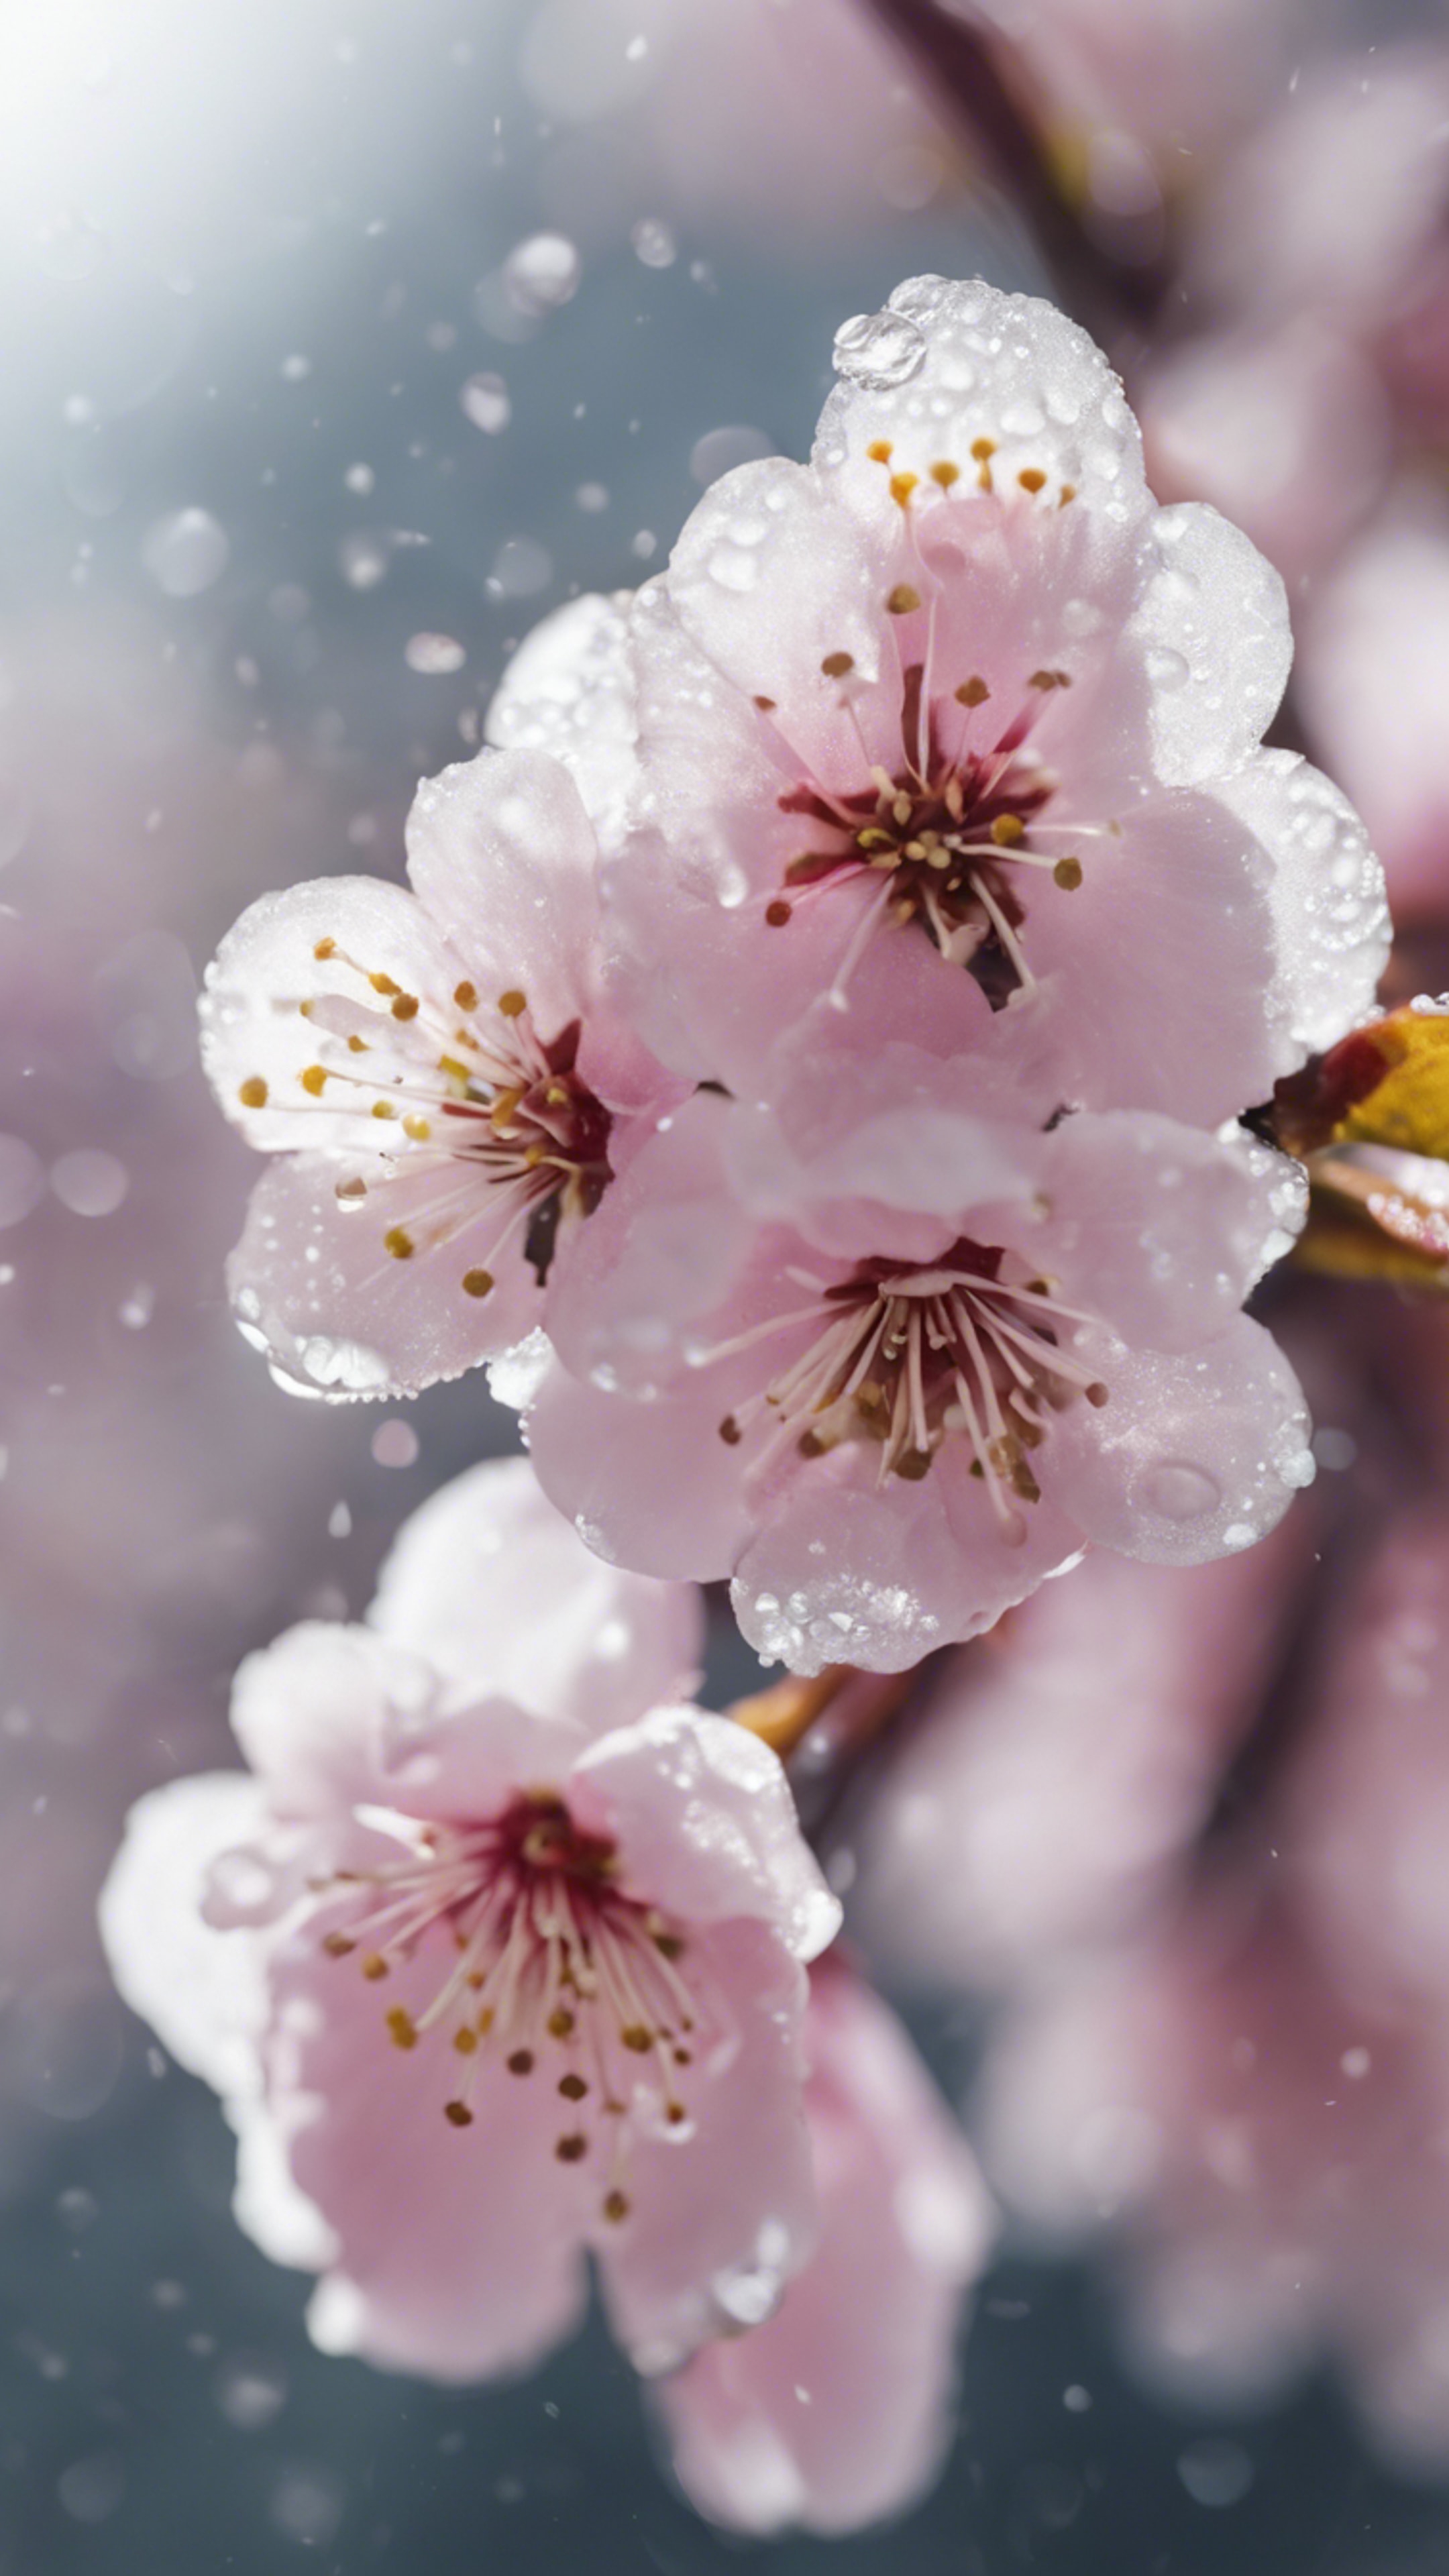 A closeup image of a freshly blooming cherry blossom, speckled with dew drops. Hintergrund[d7e9cc65cc424f509aa2]